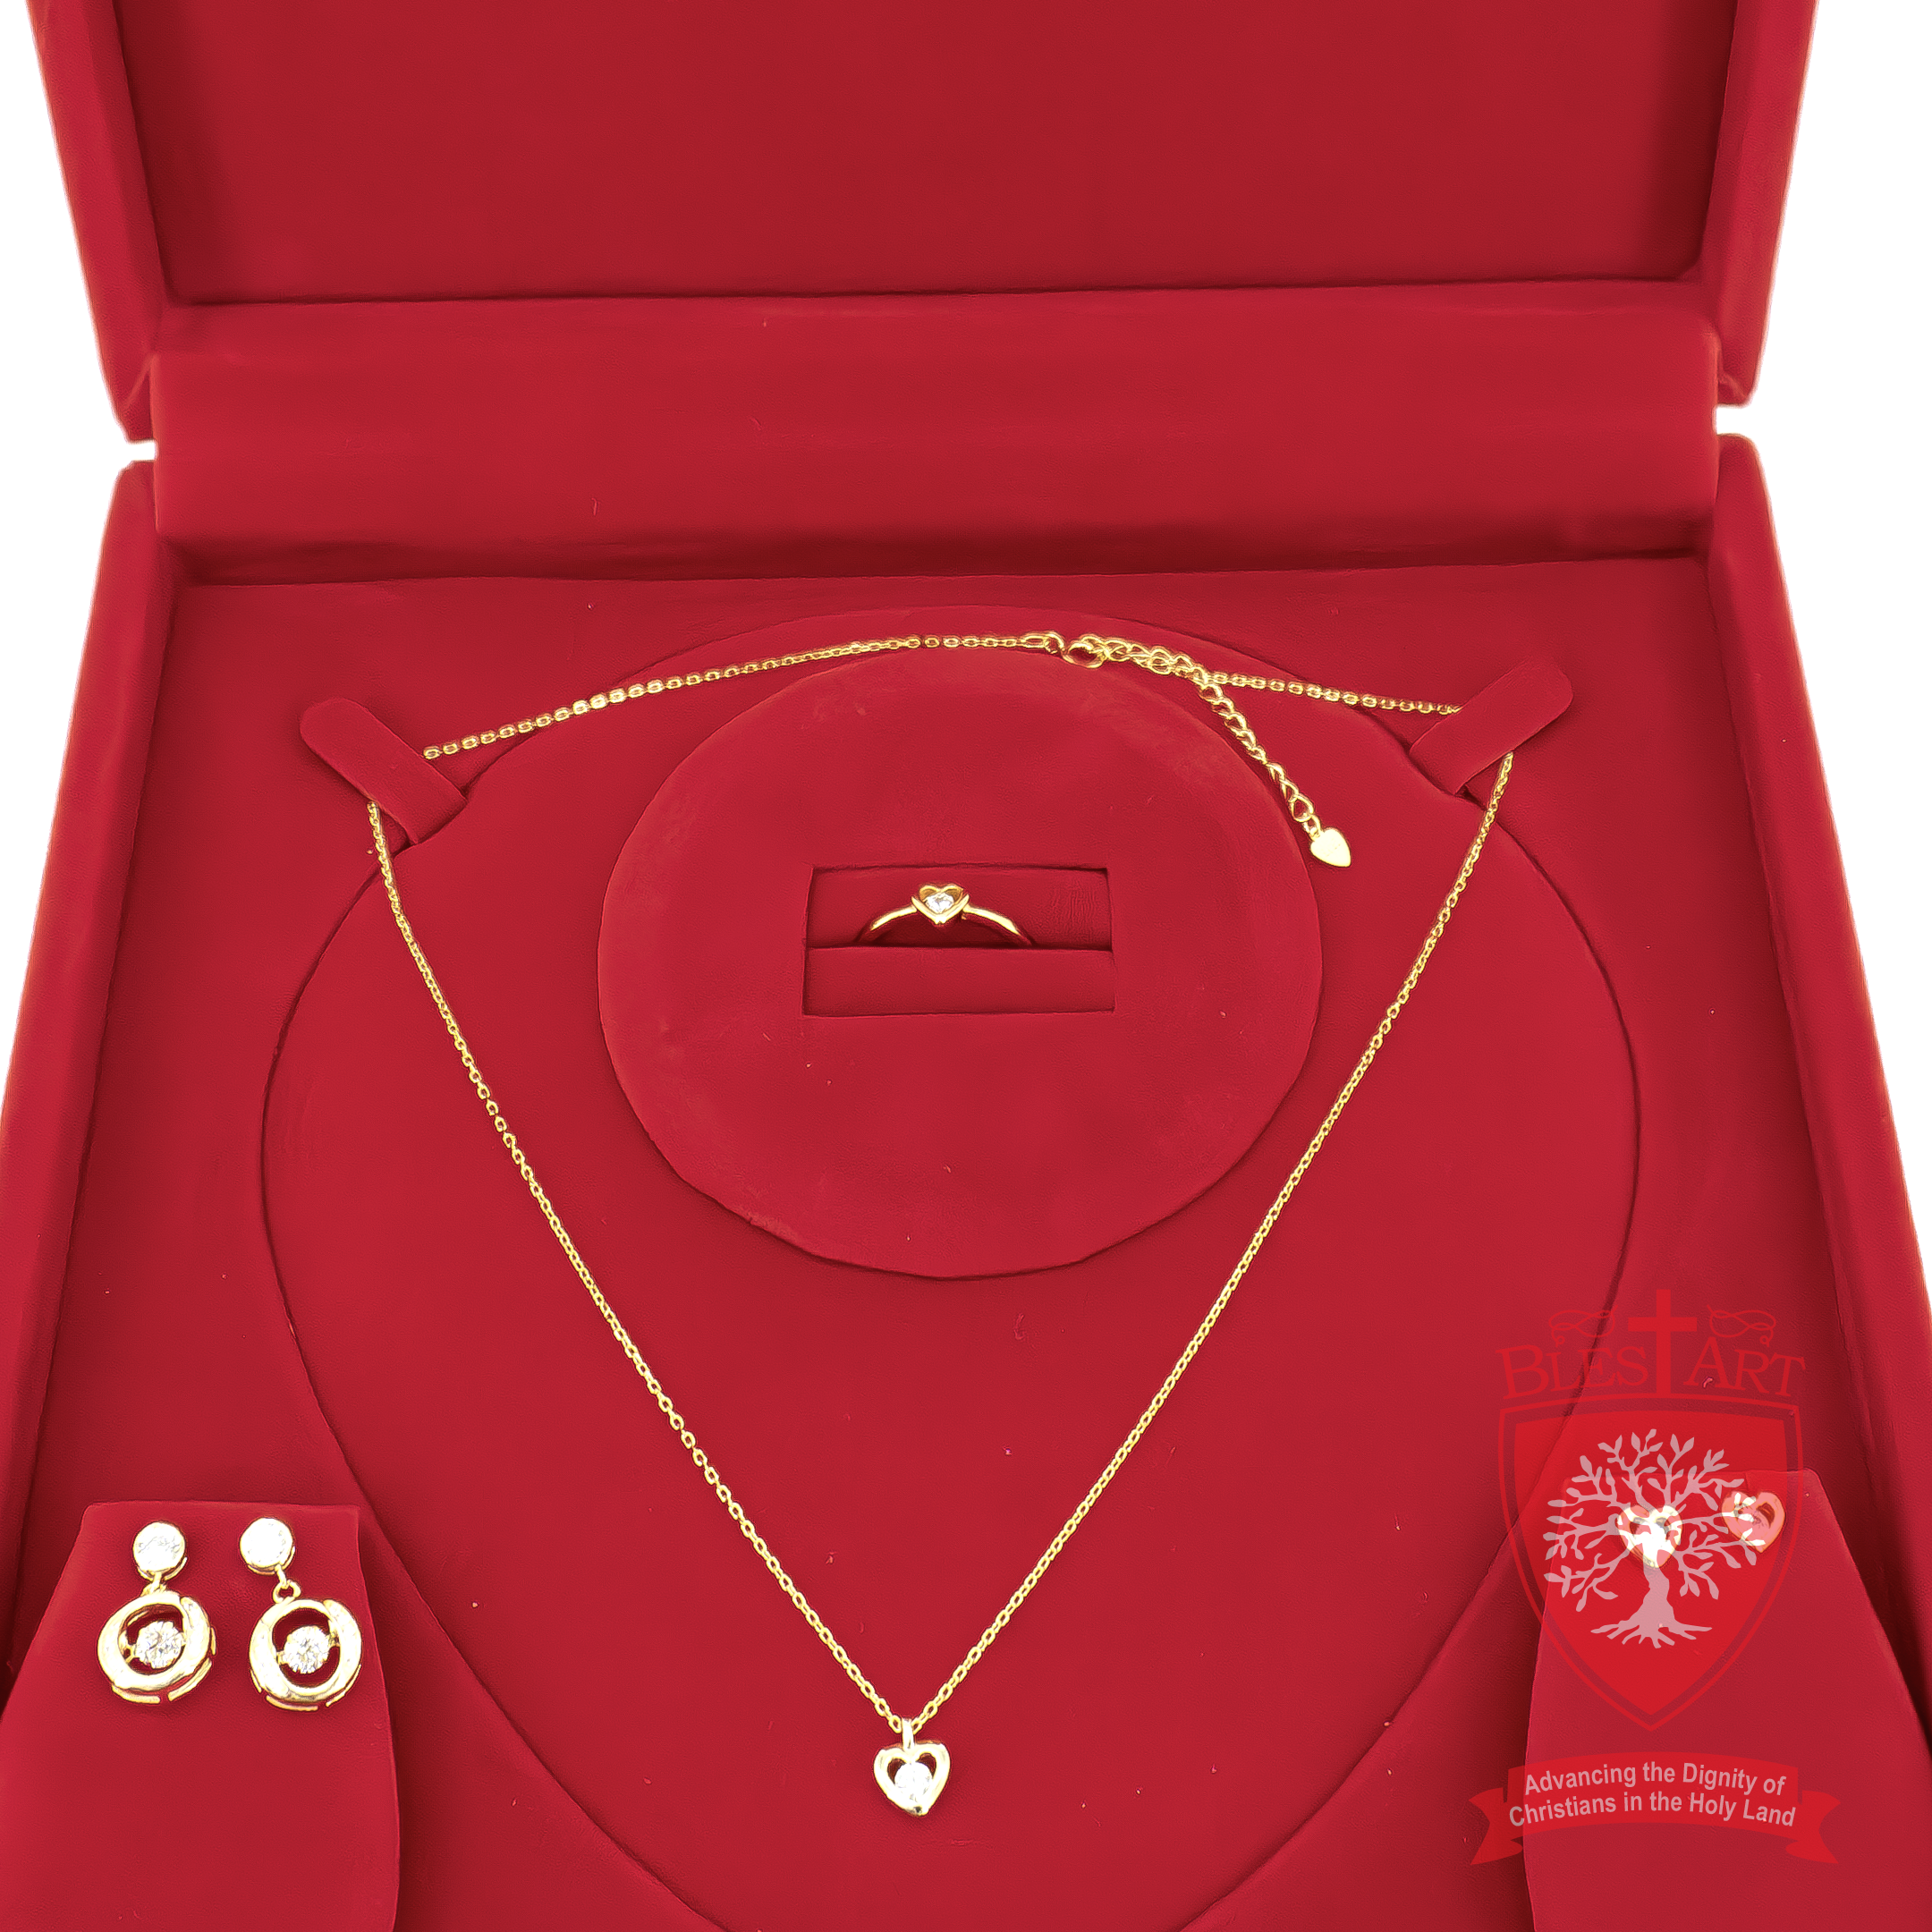 Gilded Hearts: High-End Jewelry Ensemble